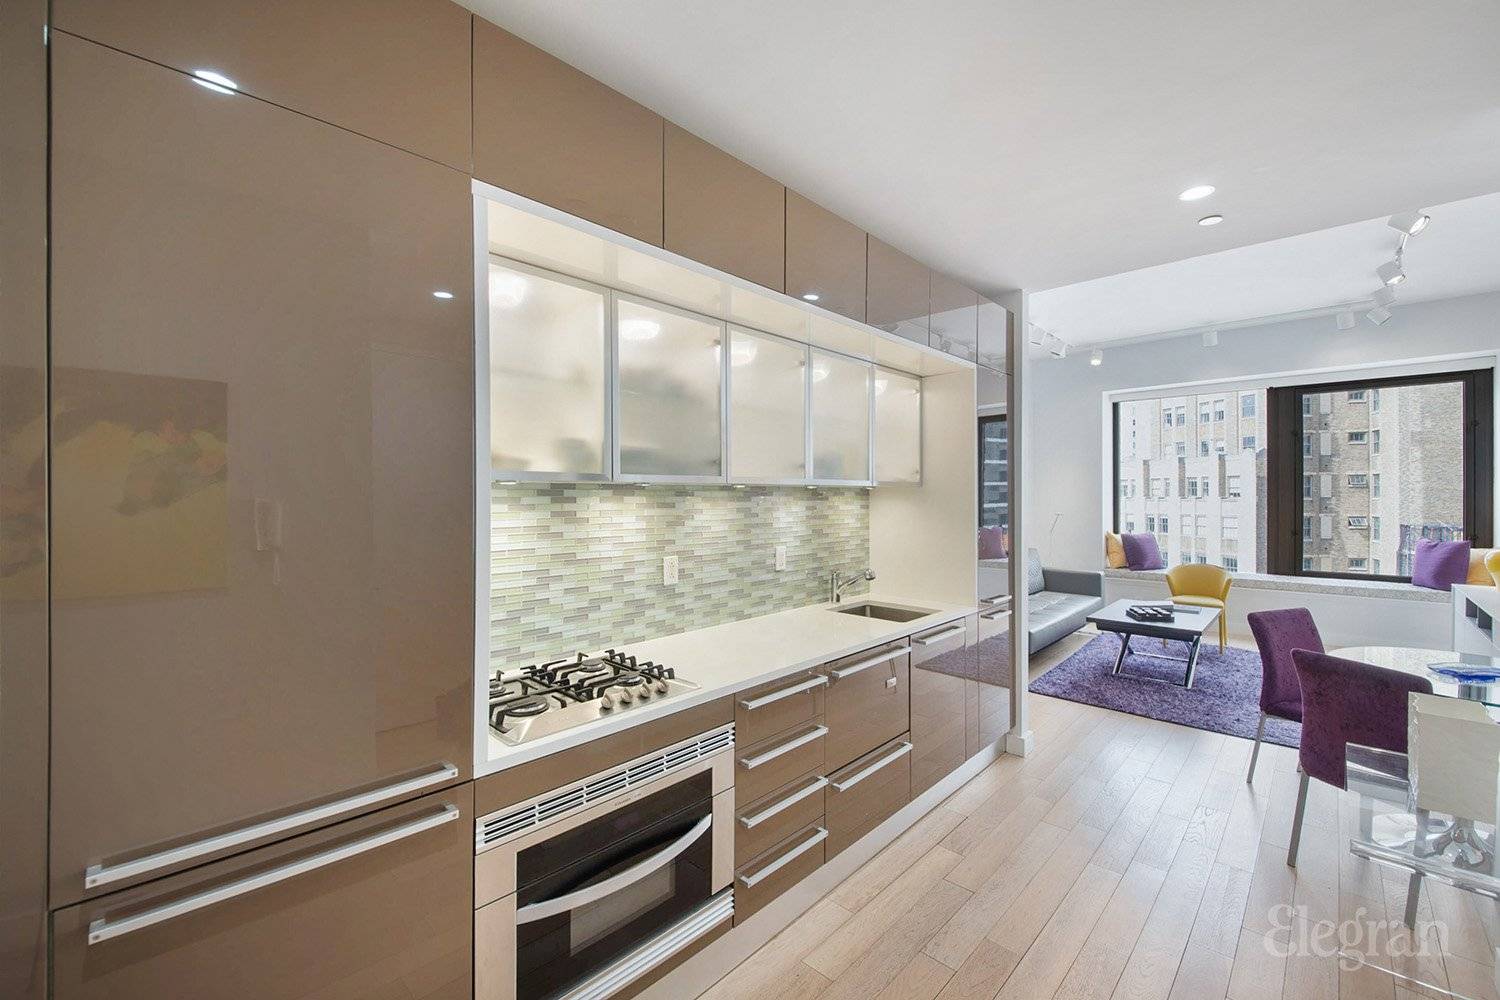 Located in the heart of the Financial District, residence 31G is a stunning 1 bedroom, 1.